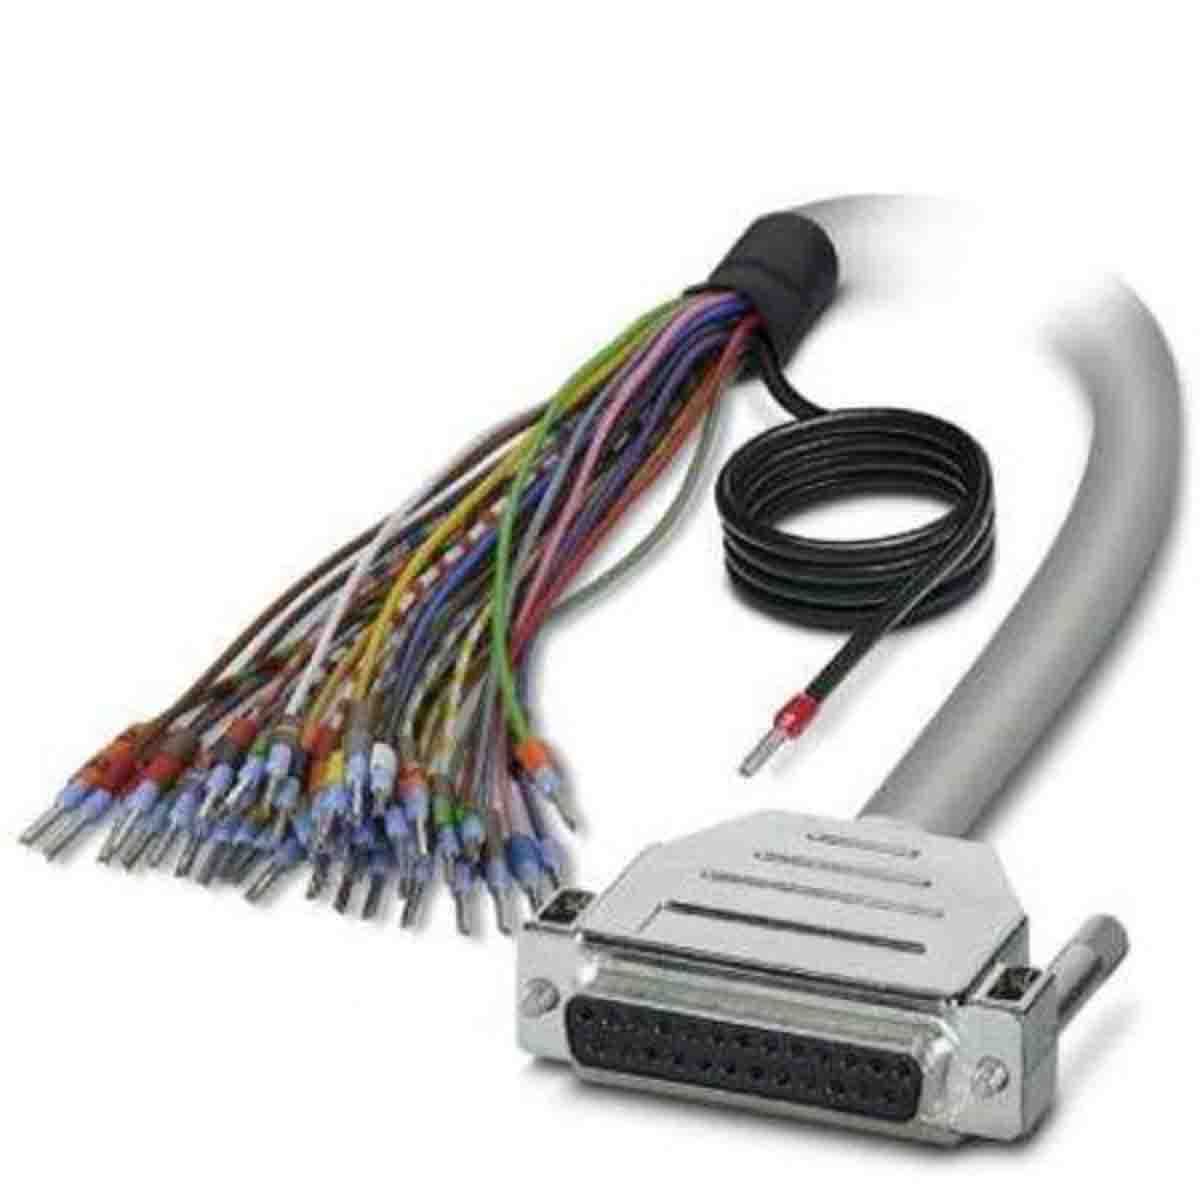 10m 25 pin D-sub to Unterminated Serial Cable